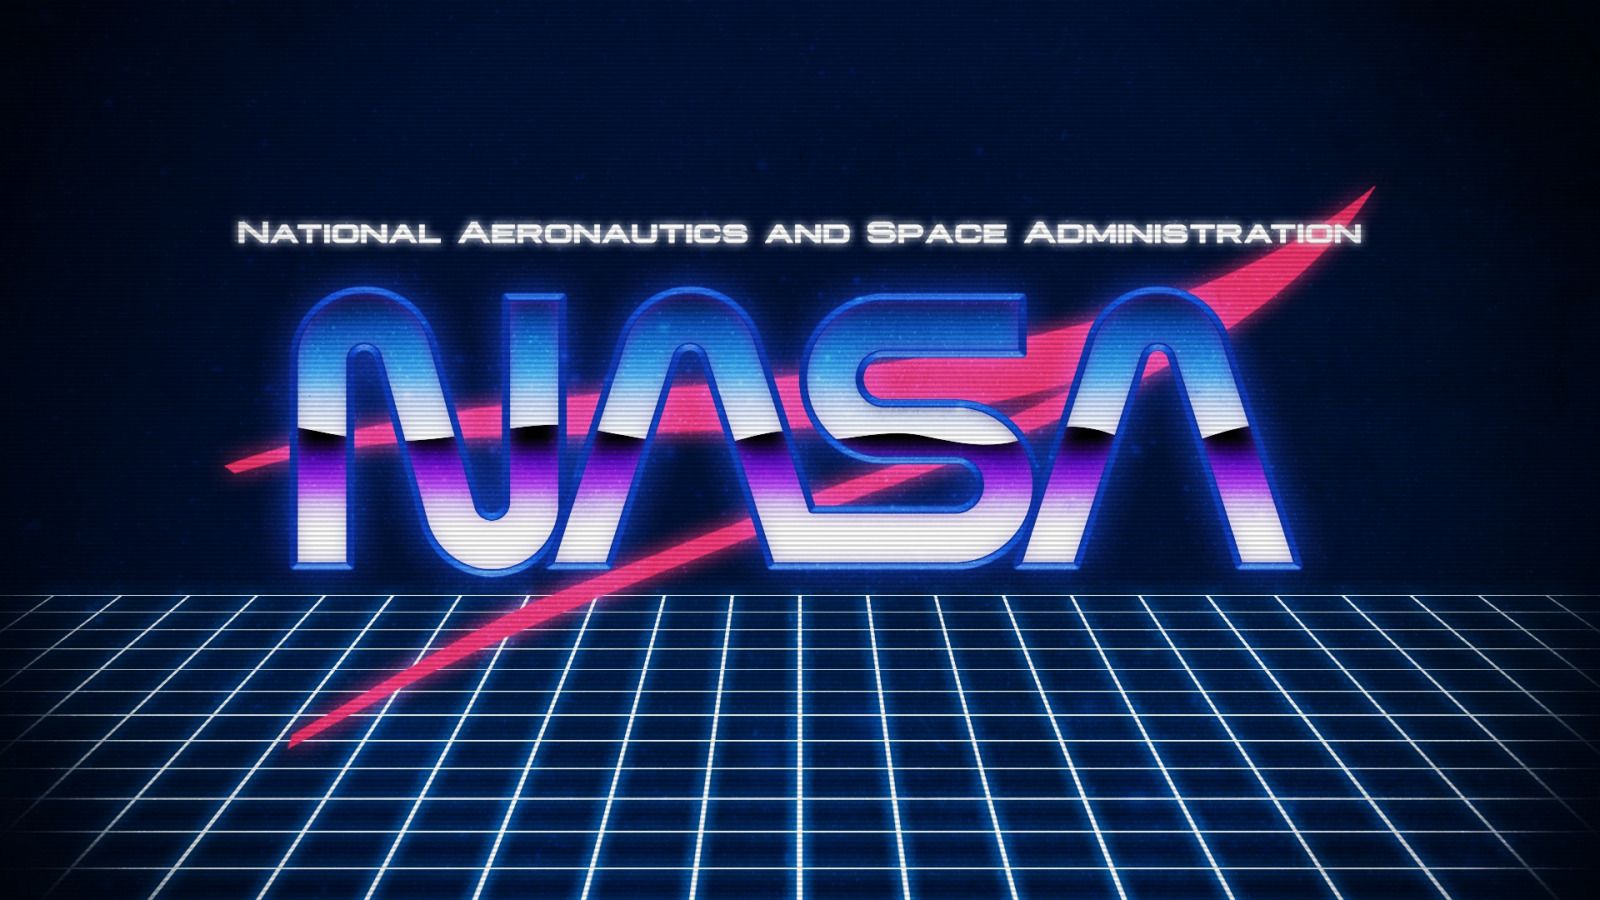 Download wallpaper logo, 80s, stars, nasa, purple, cool, aesthetic, spcae, section space in resolution 1600x900